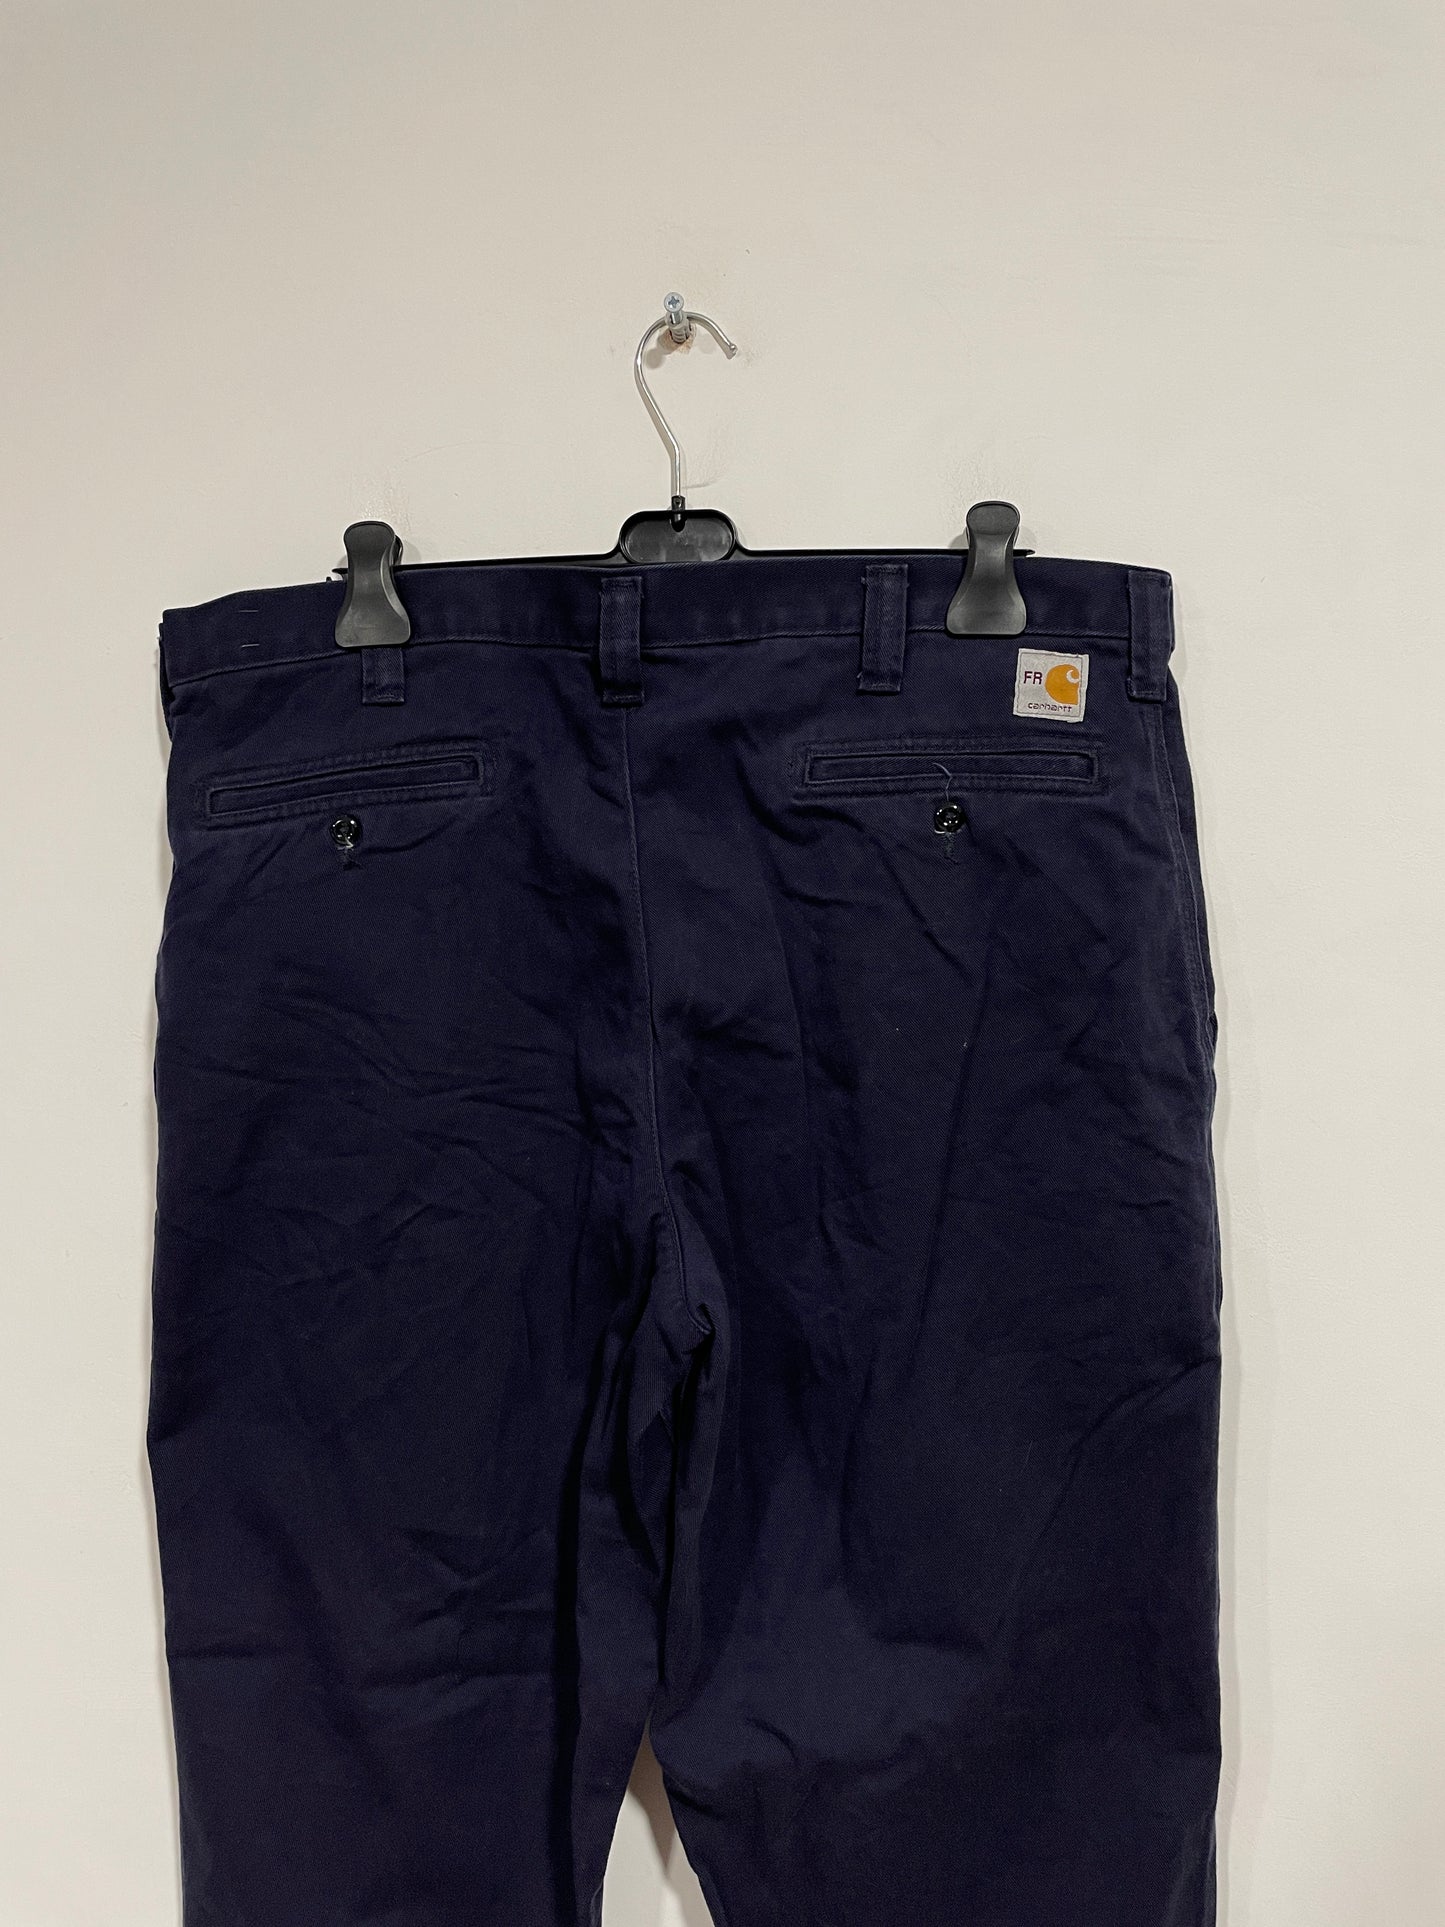 Jeans Carhartt workwear flame resistant (MR308)